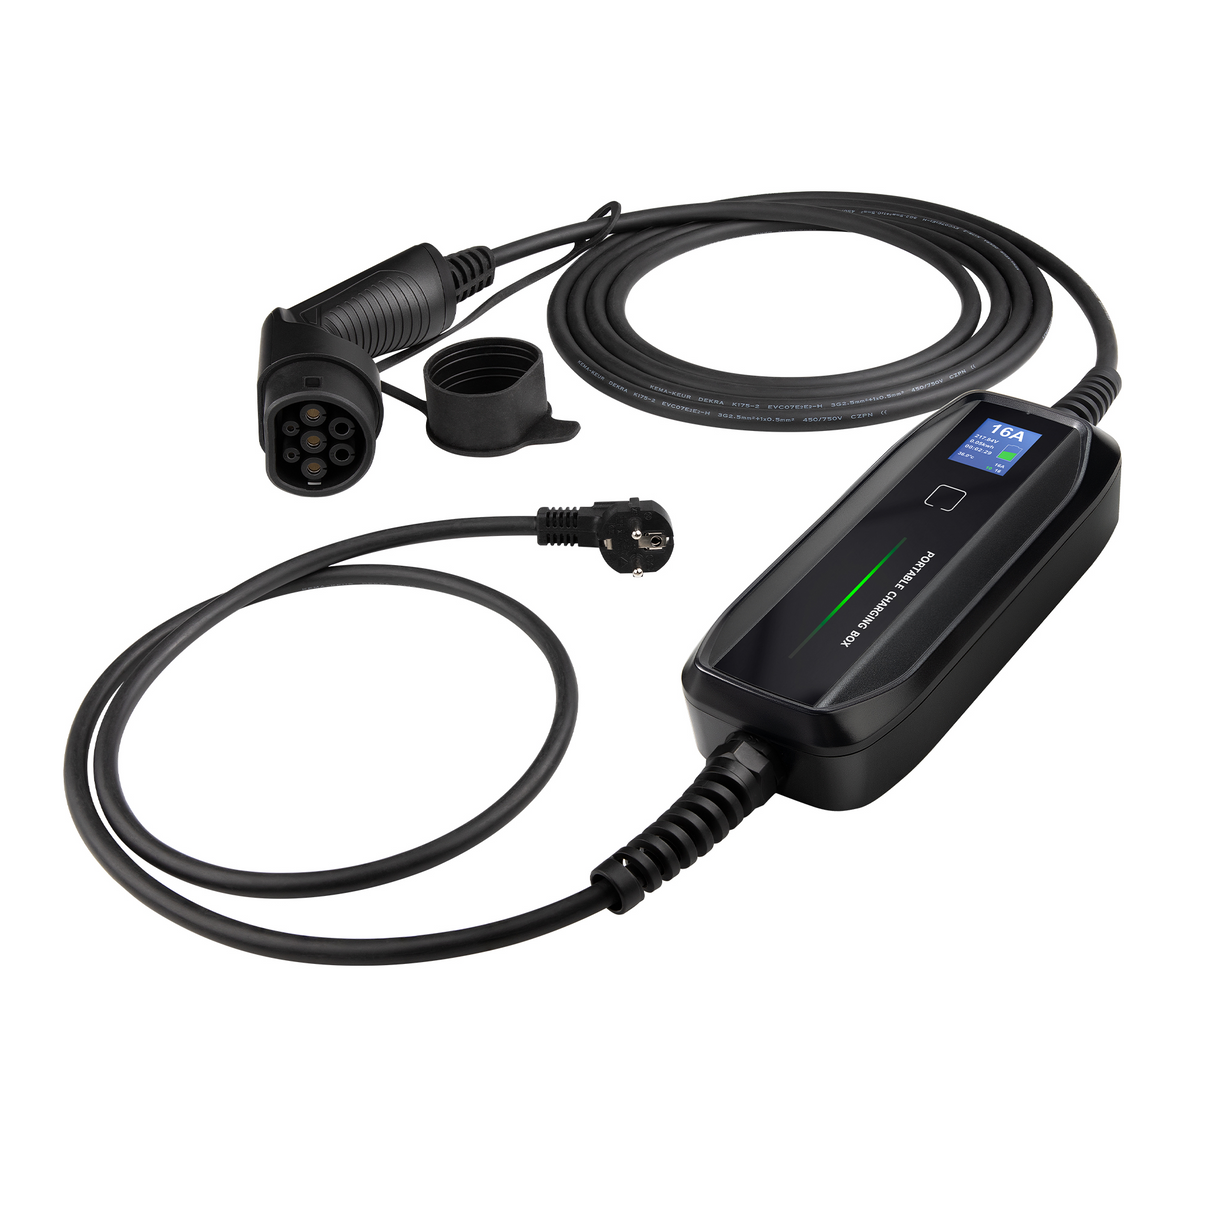 Mobile Charger Polestar 3 - Besen with LCD - Type 2 to Schuko